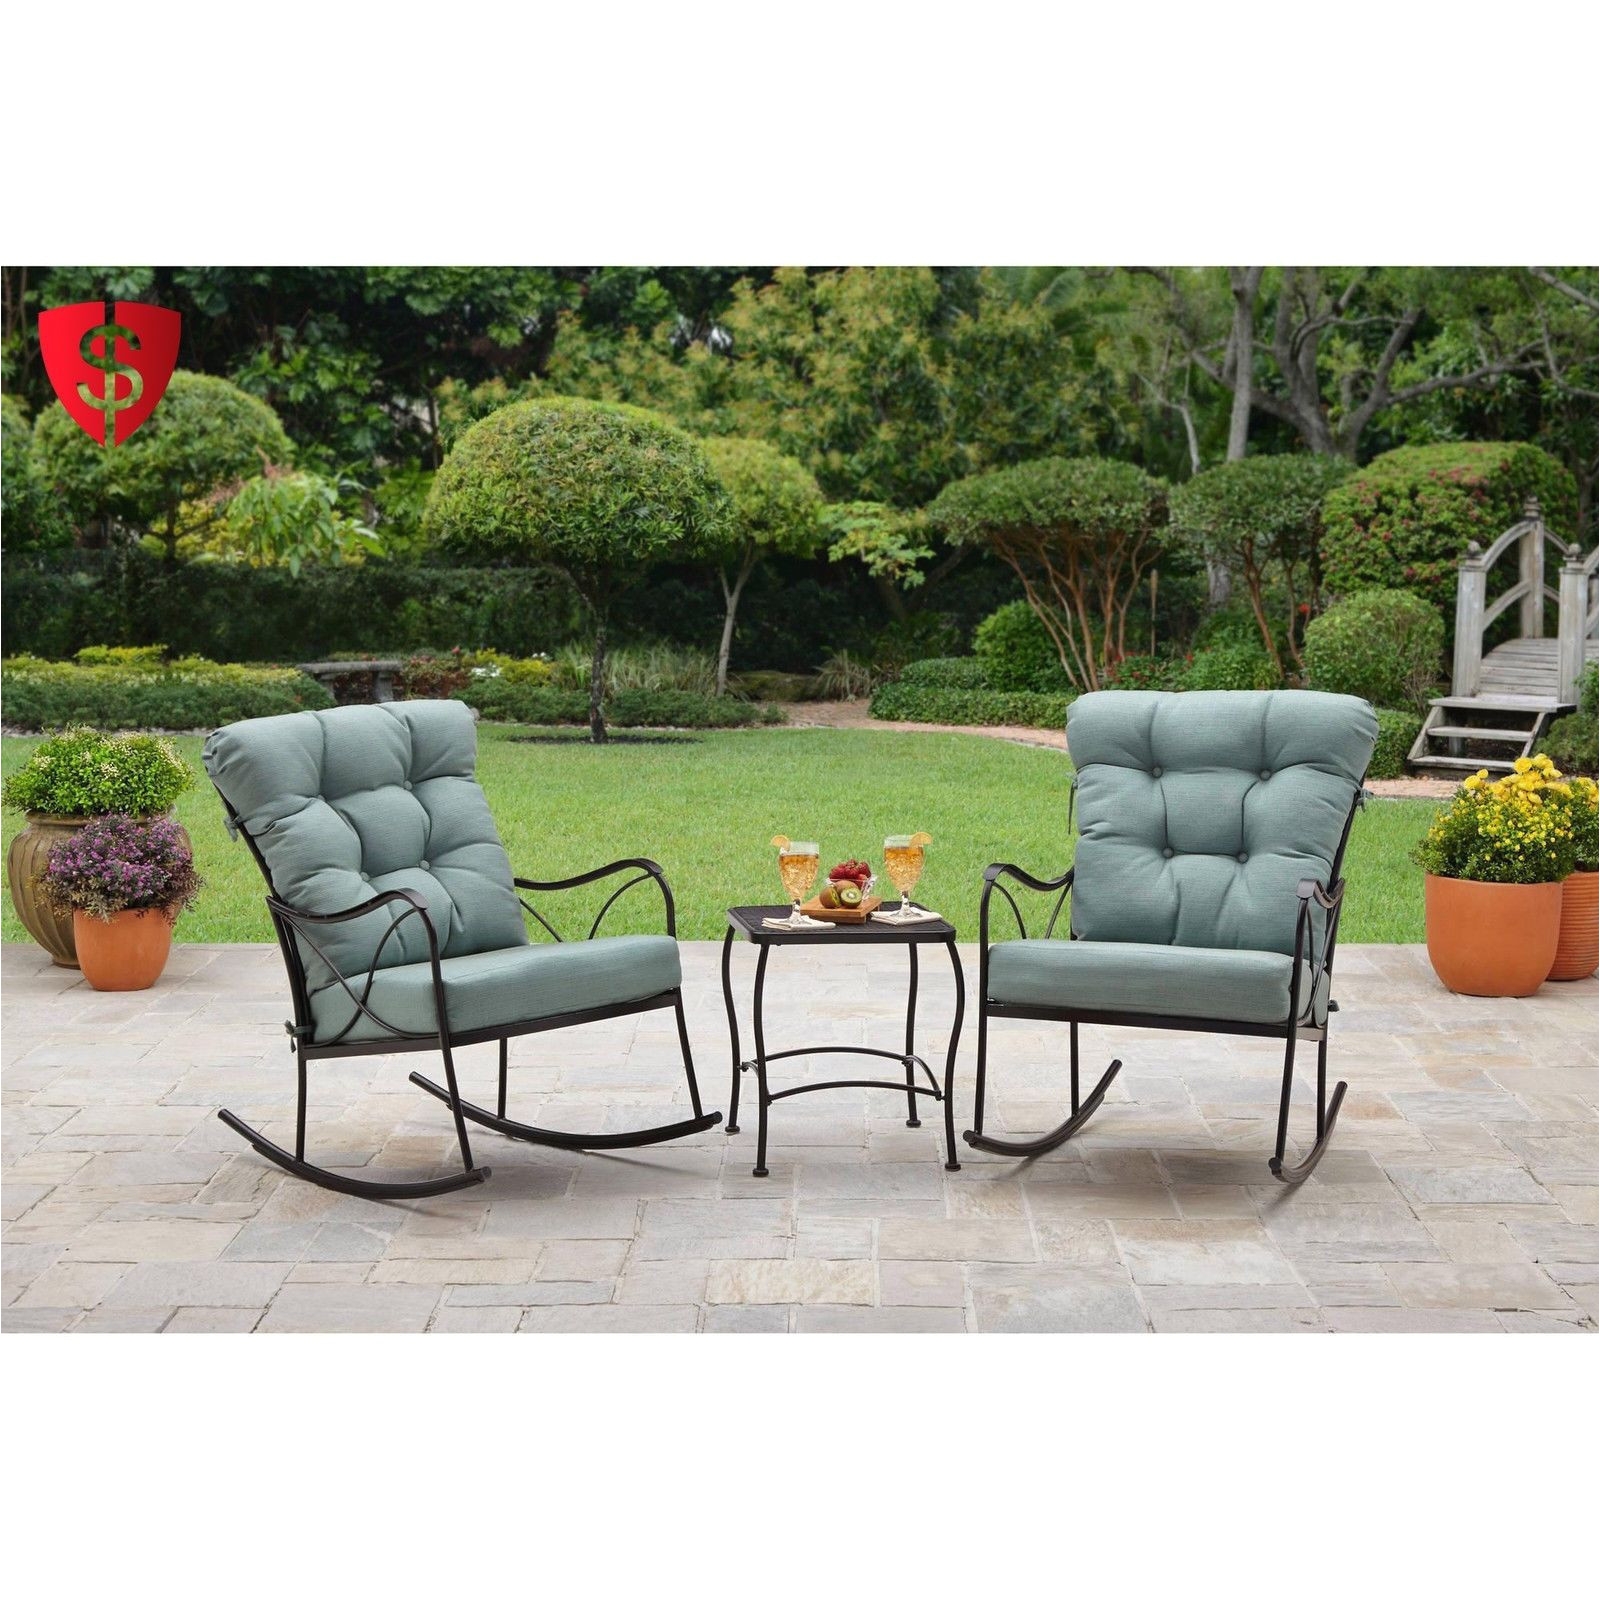 gray patio chairs awesome blue patio chairs awesome blue patio set best wicker outdoor sofa 0d